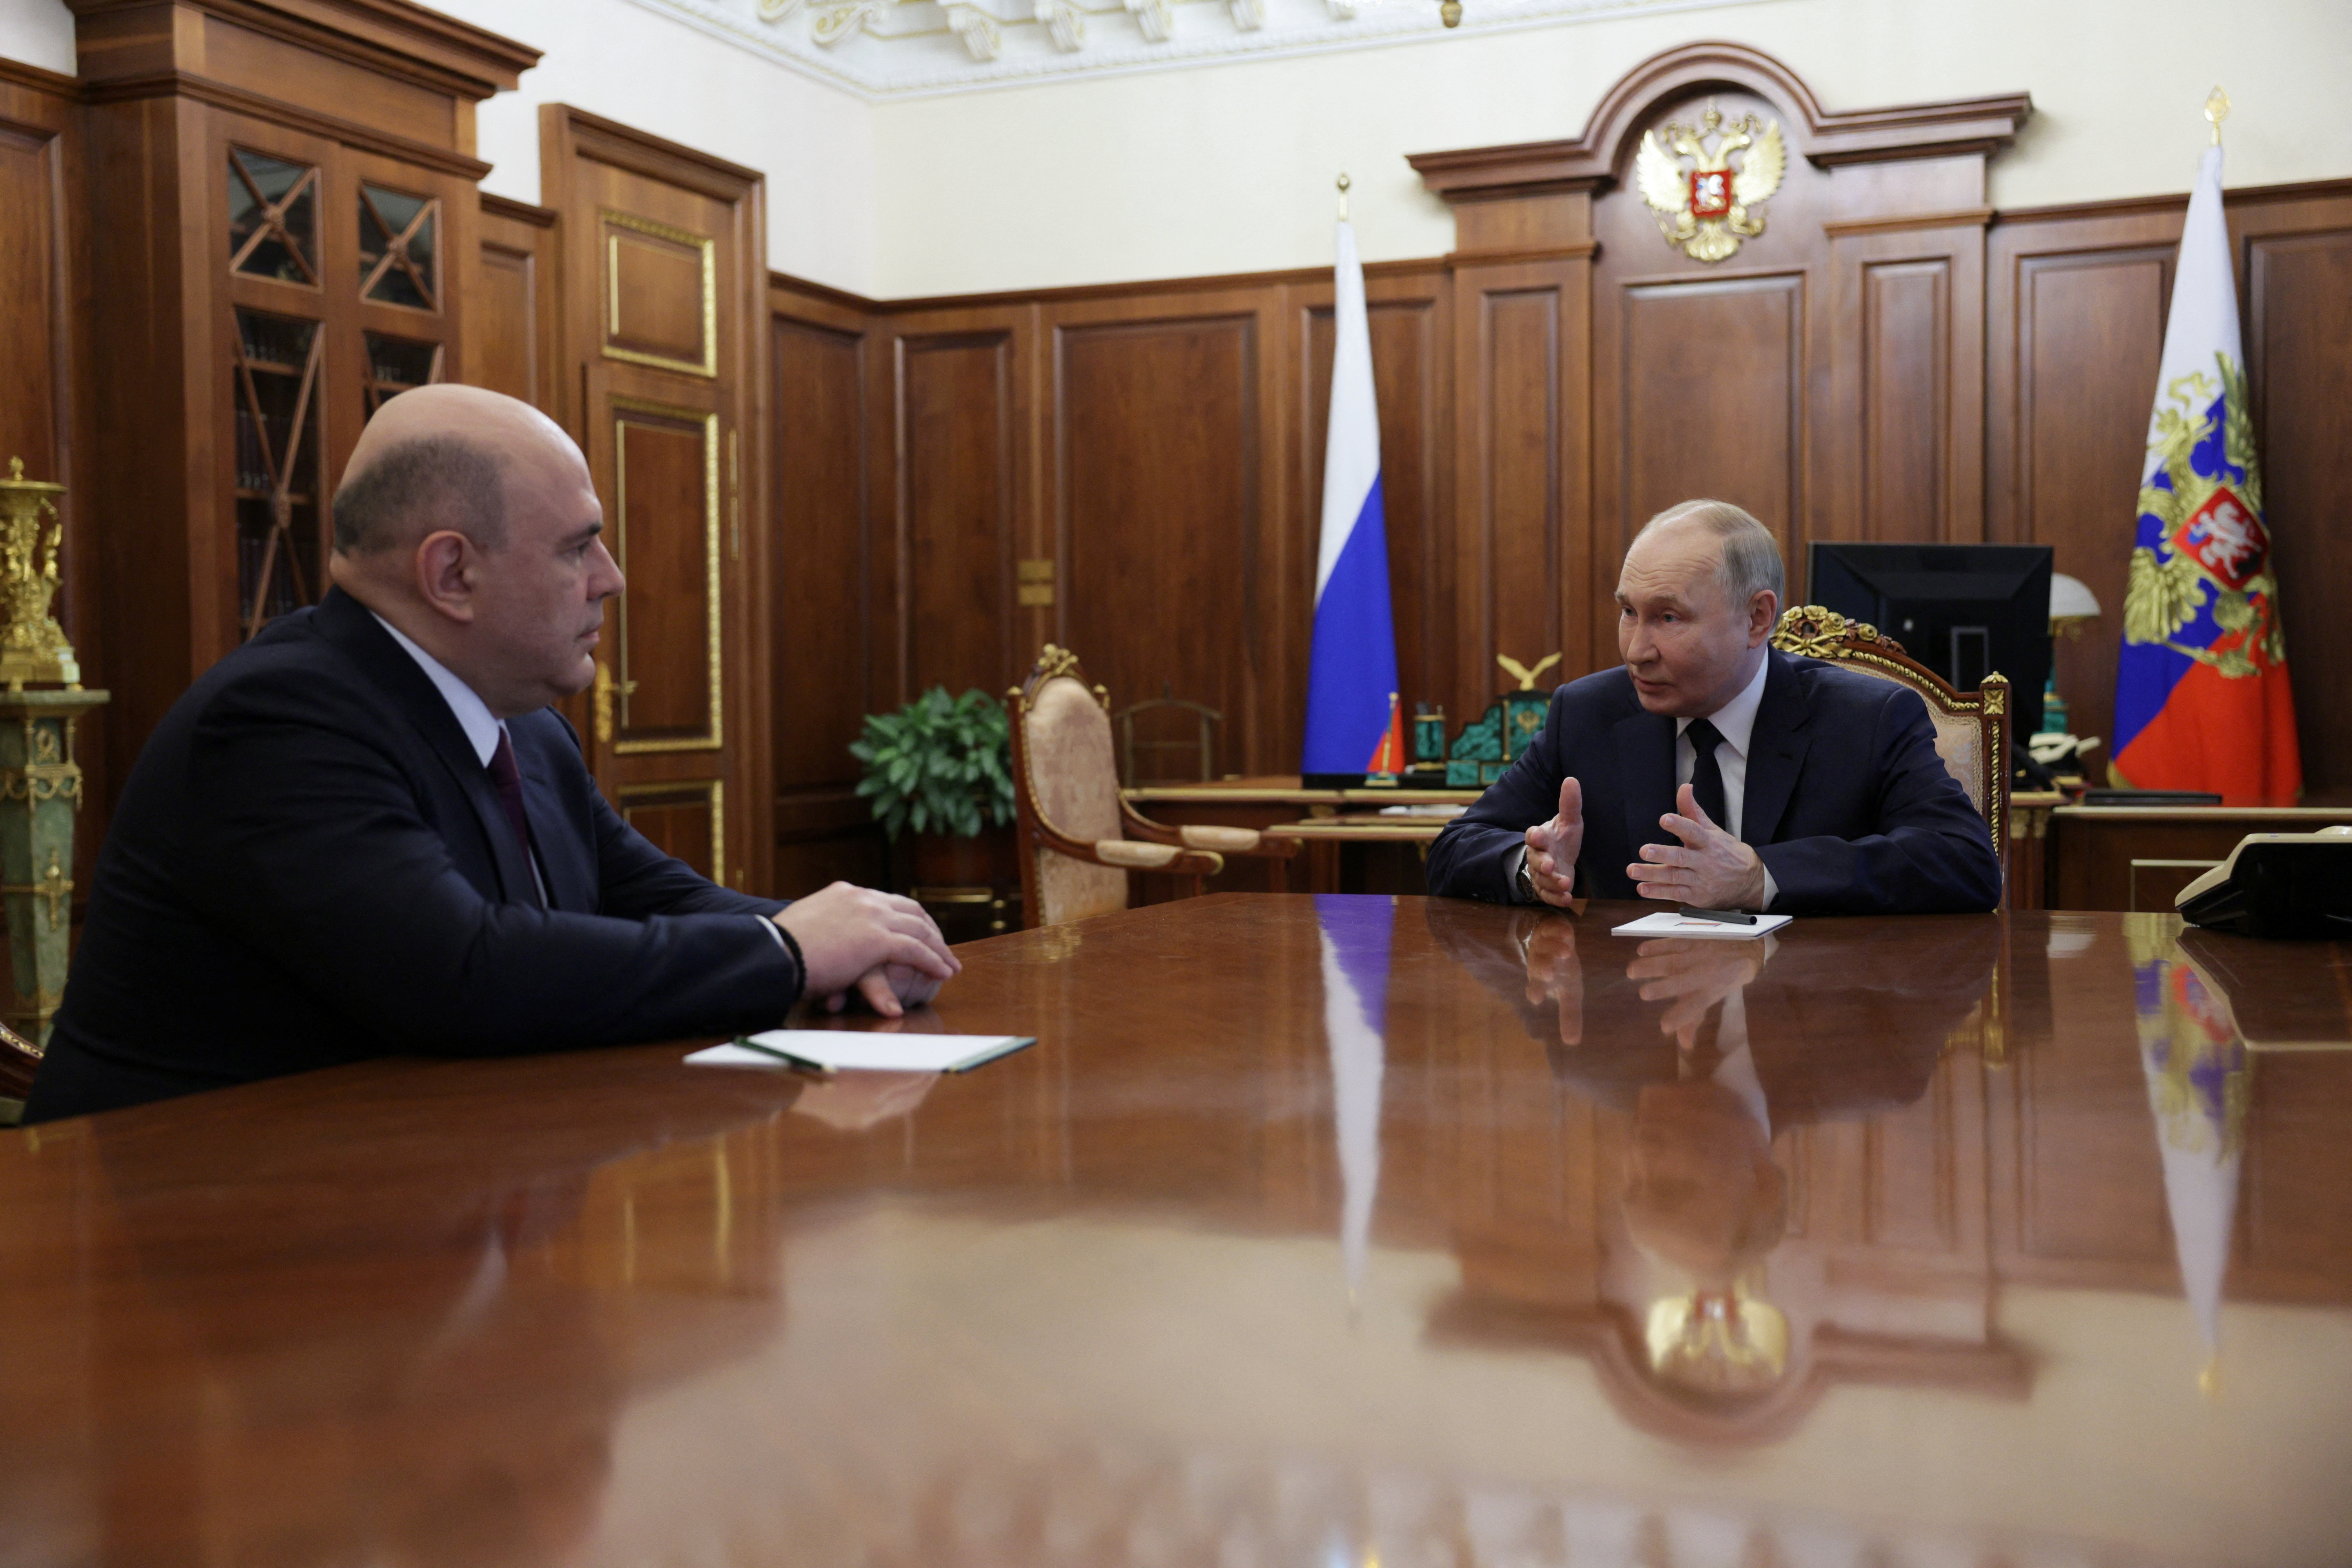 Russian President Putin meets with the candidate for the post of Russian Prime Minister Mishustin in Moscow